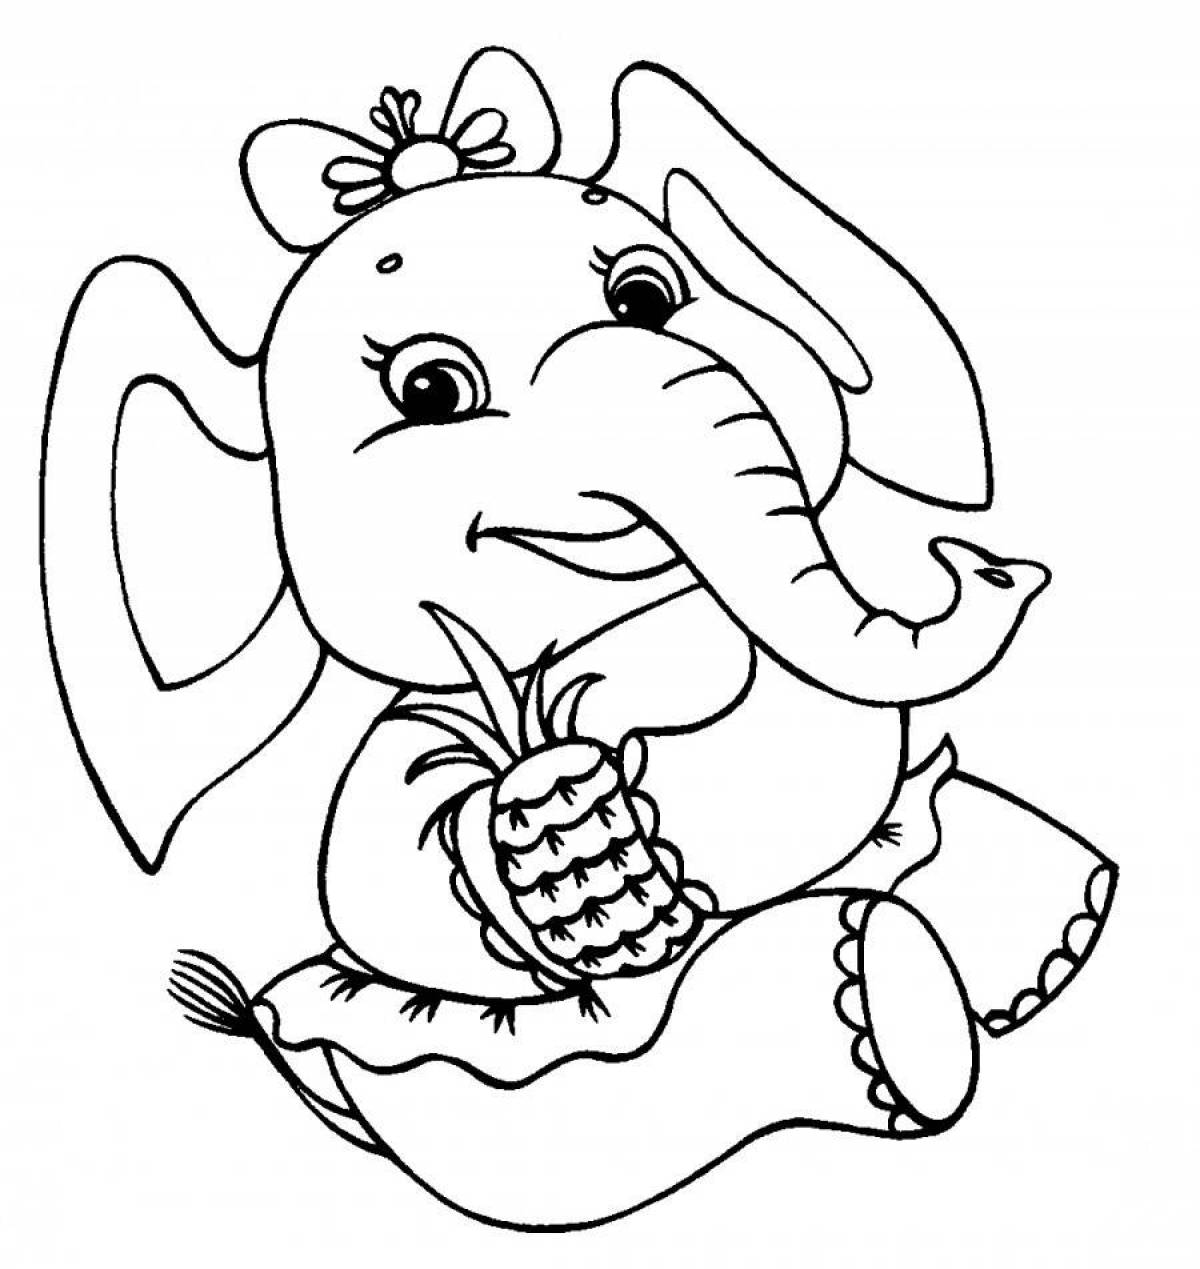 Coloring elephant for children